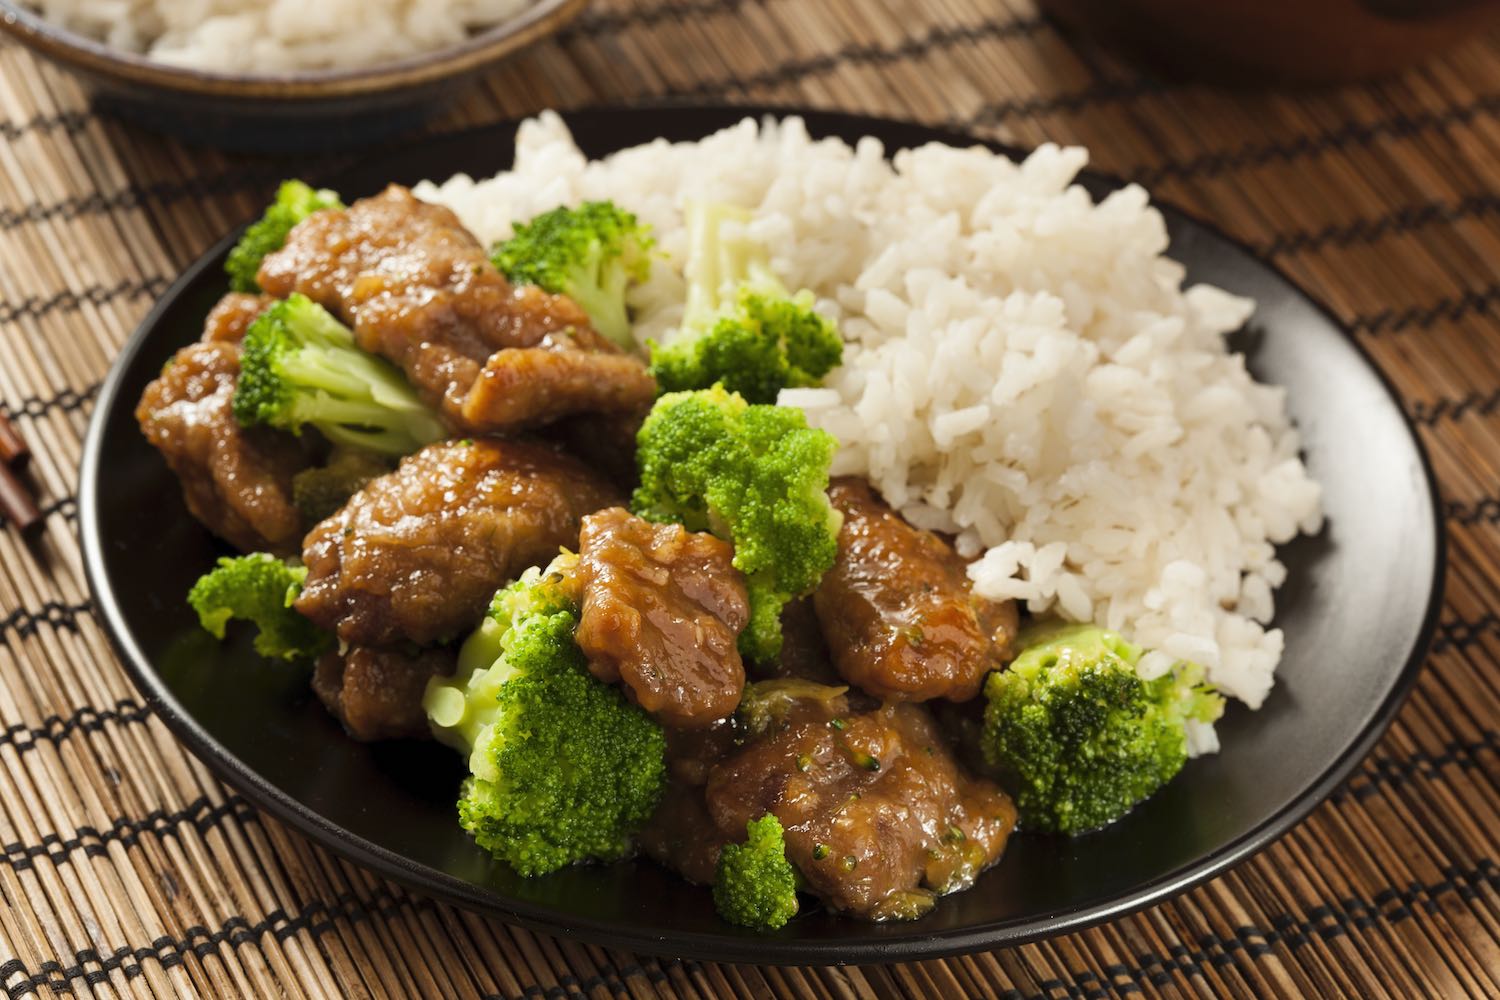 Rice dish with meat and broccoli.